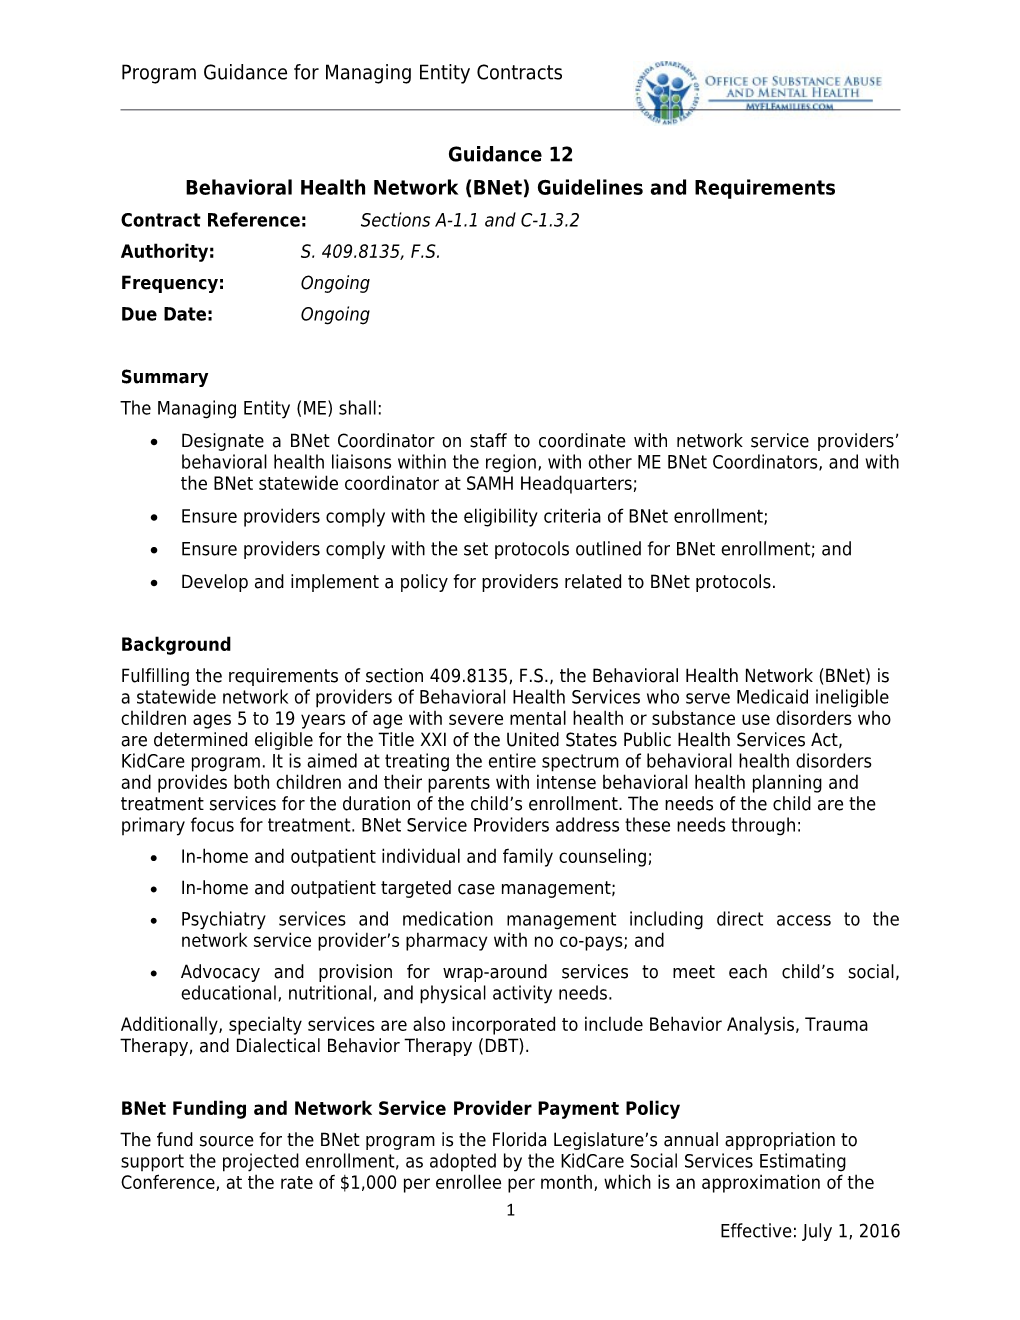 Behavioral Health Network (Bnet) Guidelines and Requirements